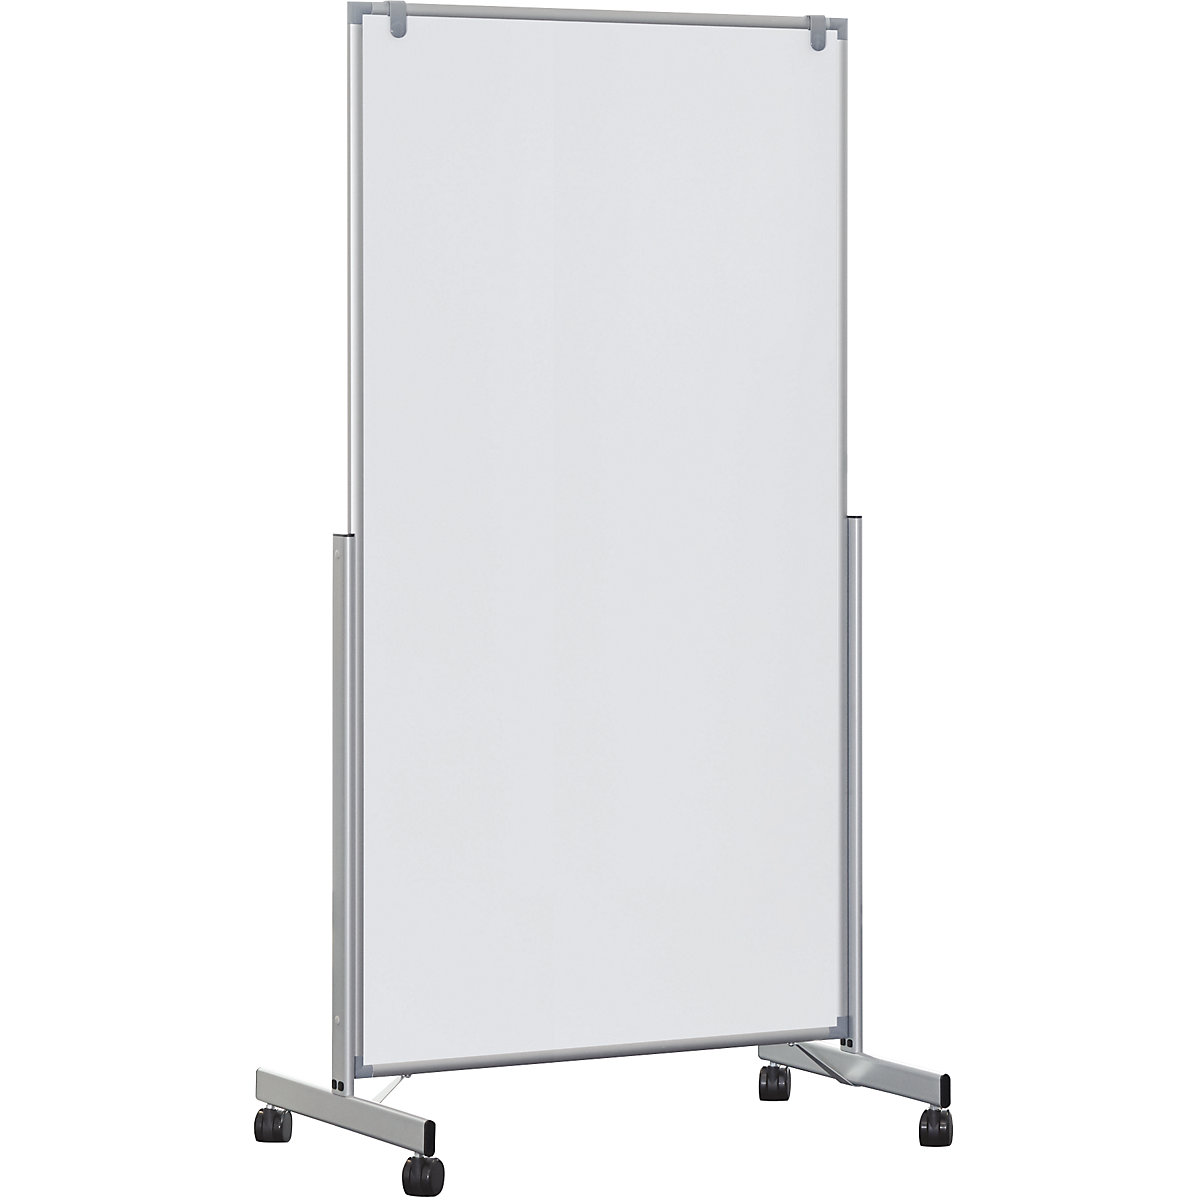 Whiteboard MAULpro easy2move, mobil MAUL, HxT 1965 x 640 mm, alusilber, Tafel-HxB 1800 x 1000 mm